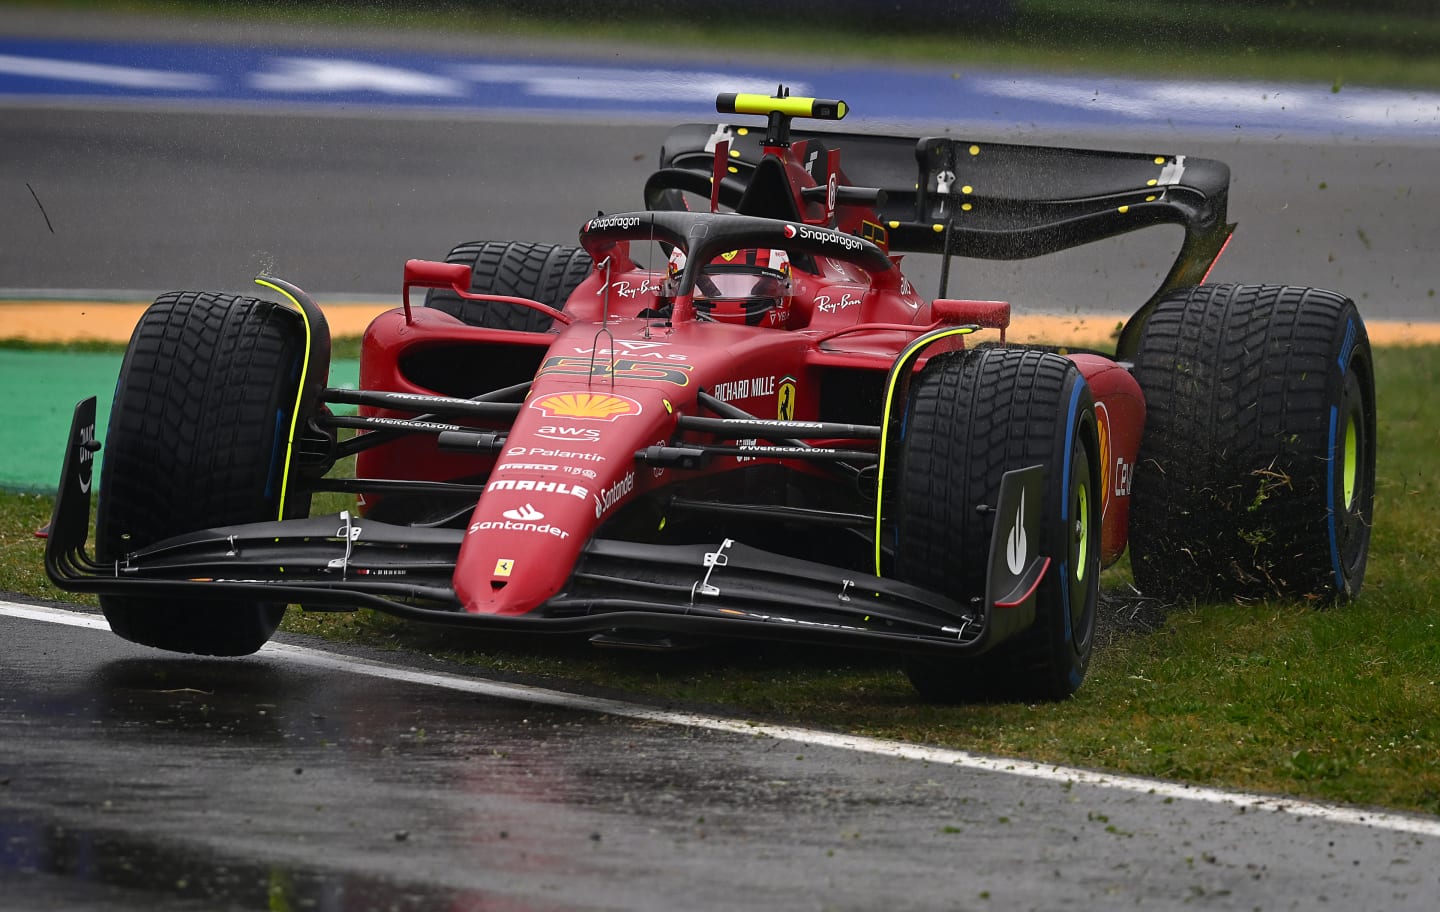 IMOLA, ITALY - APRIL 22: Carlos Sainz of Spain driving (55) the Ferrari F1-75 on track during